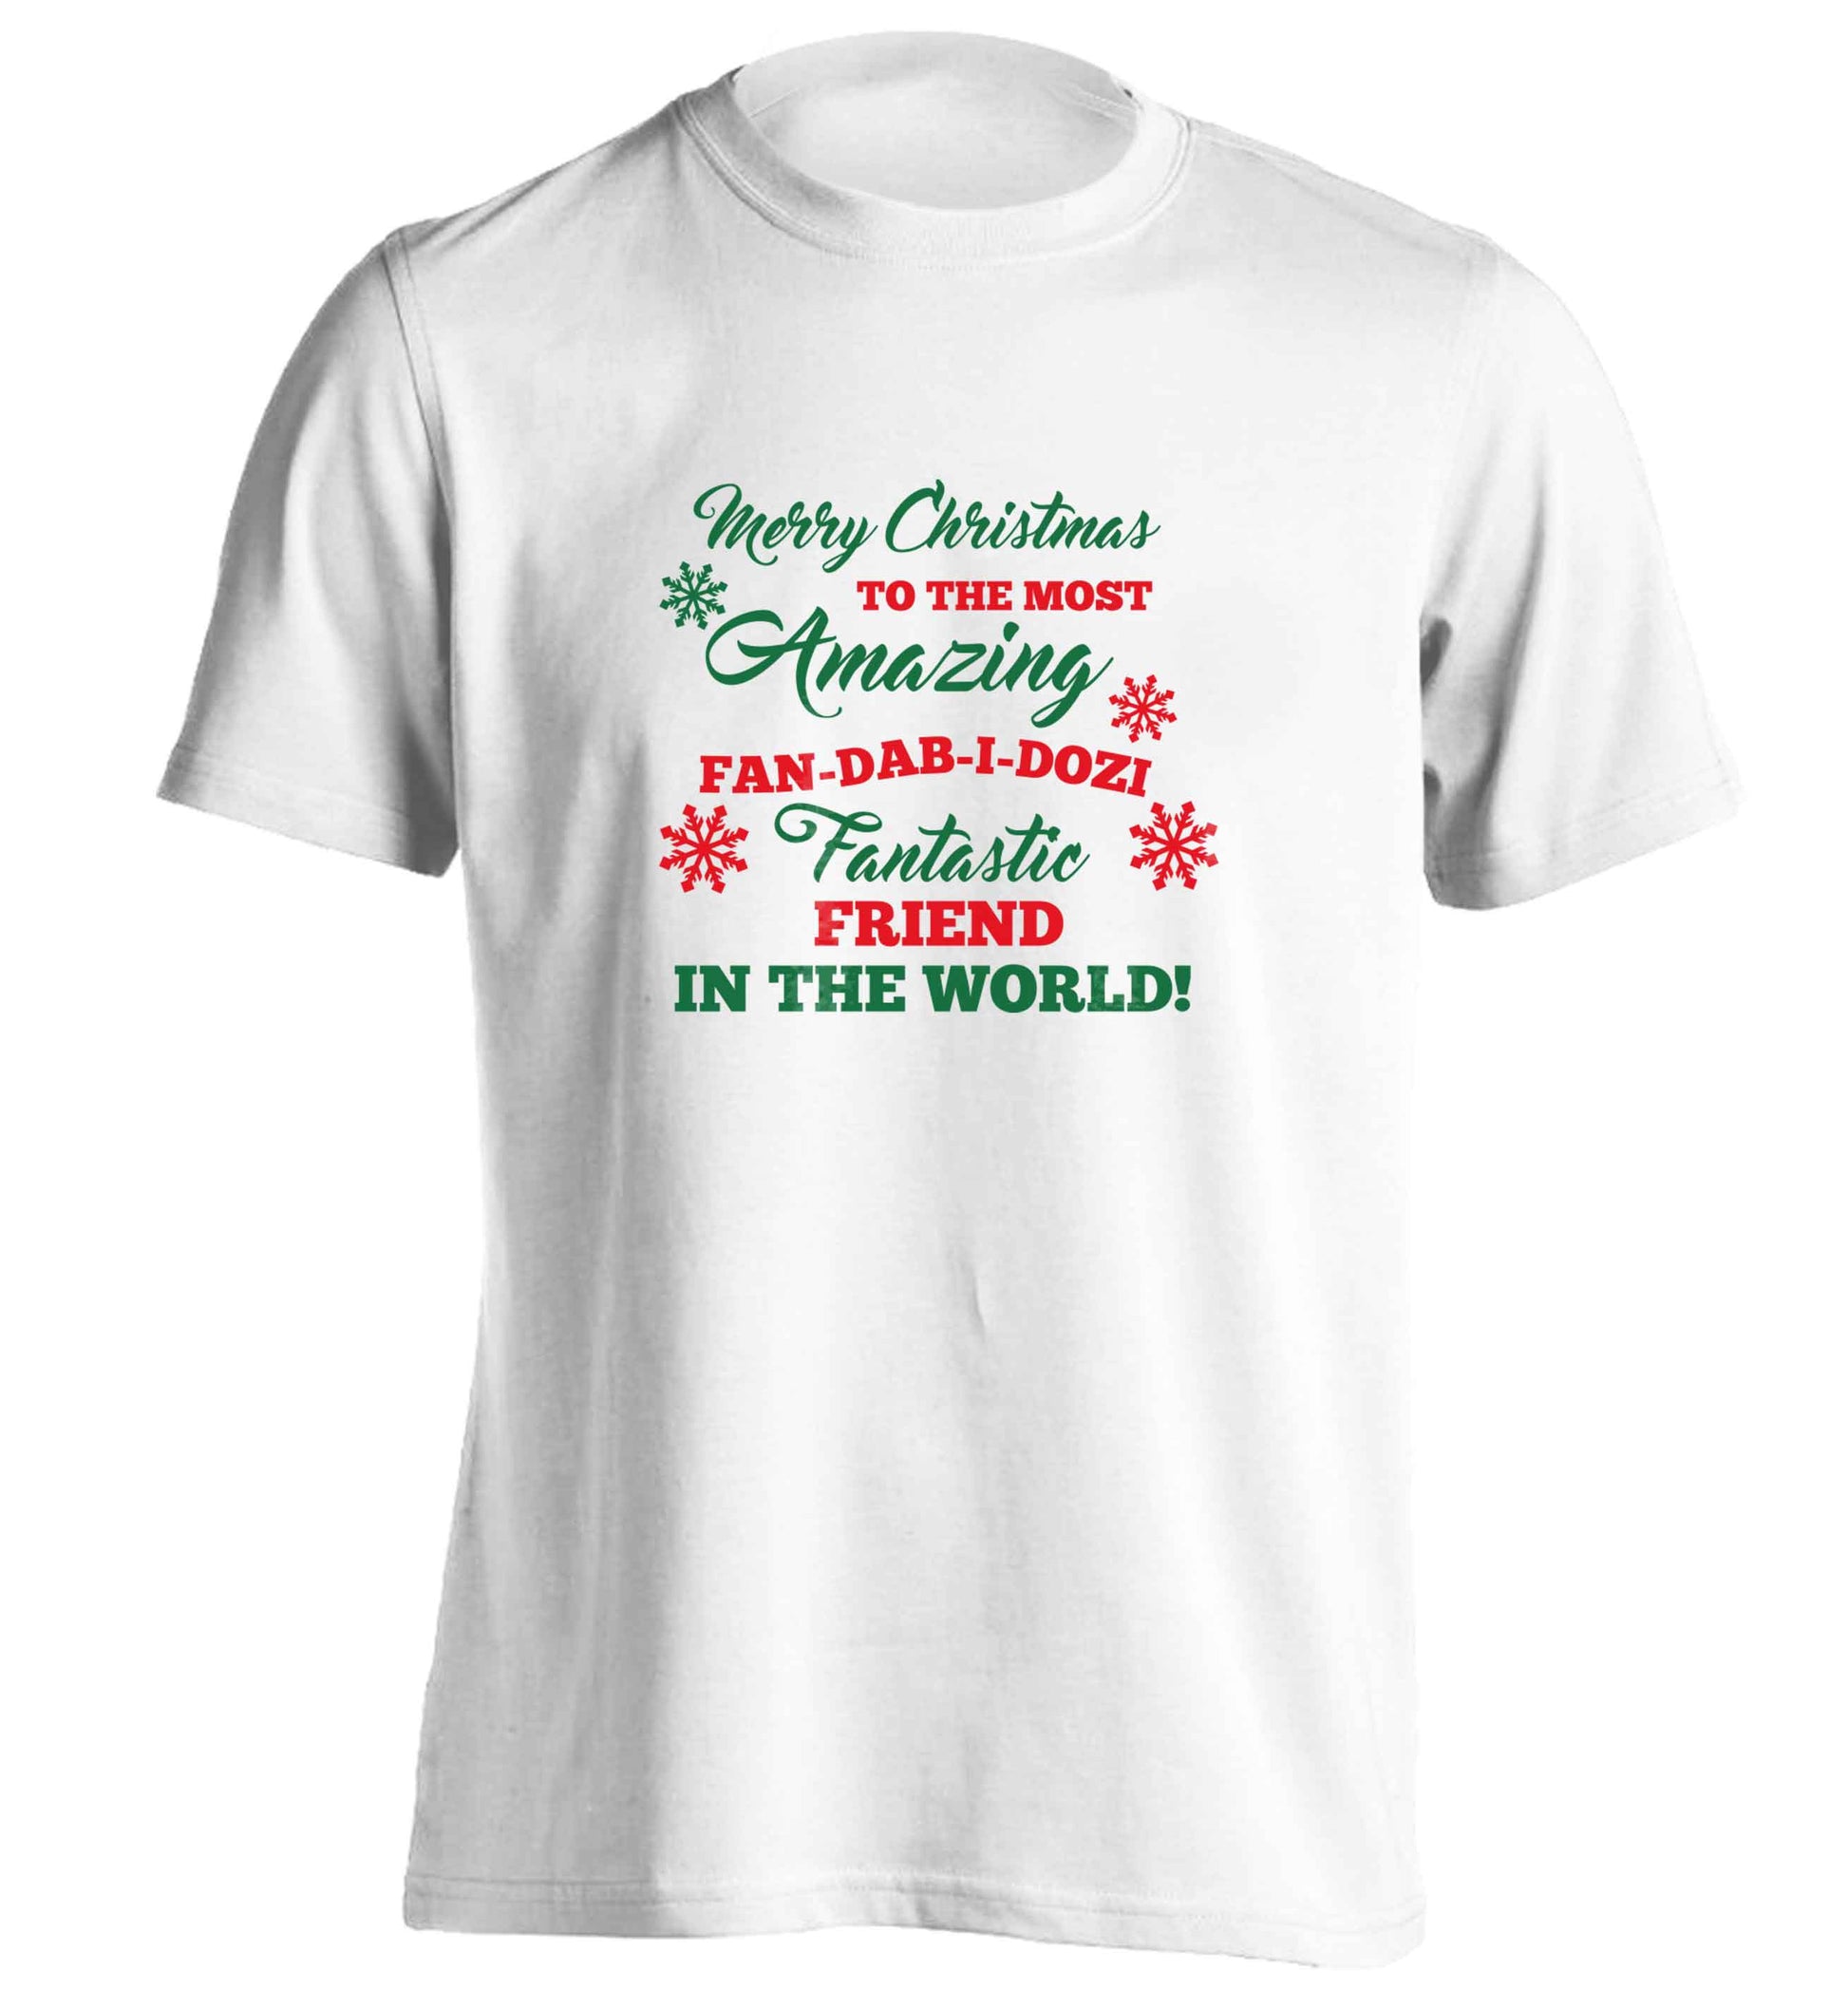 Merry Christmas to the most amazing fan-dab-i-dozi fantasic friend in the world adults unisex white Tshirt 2XL